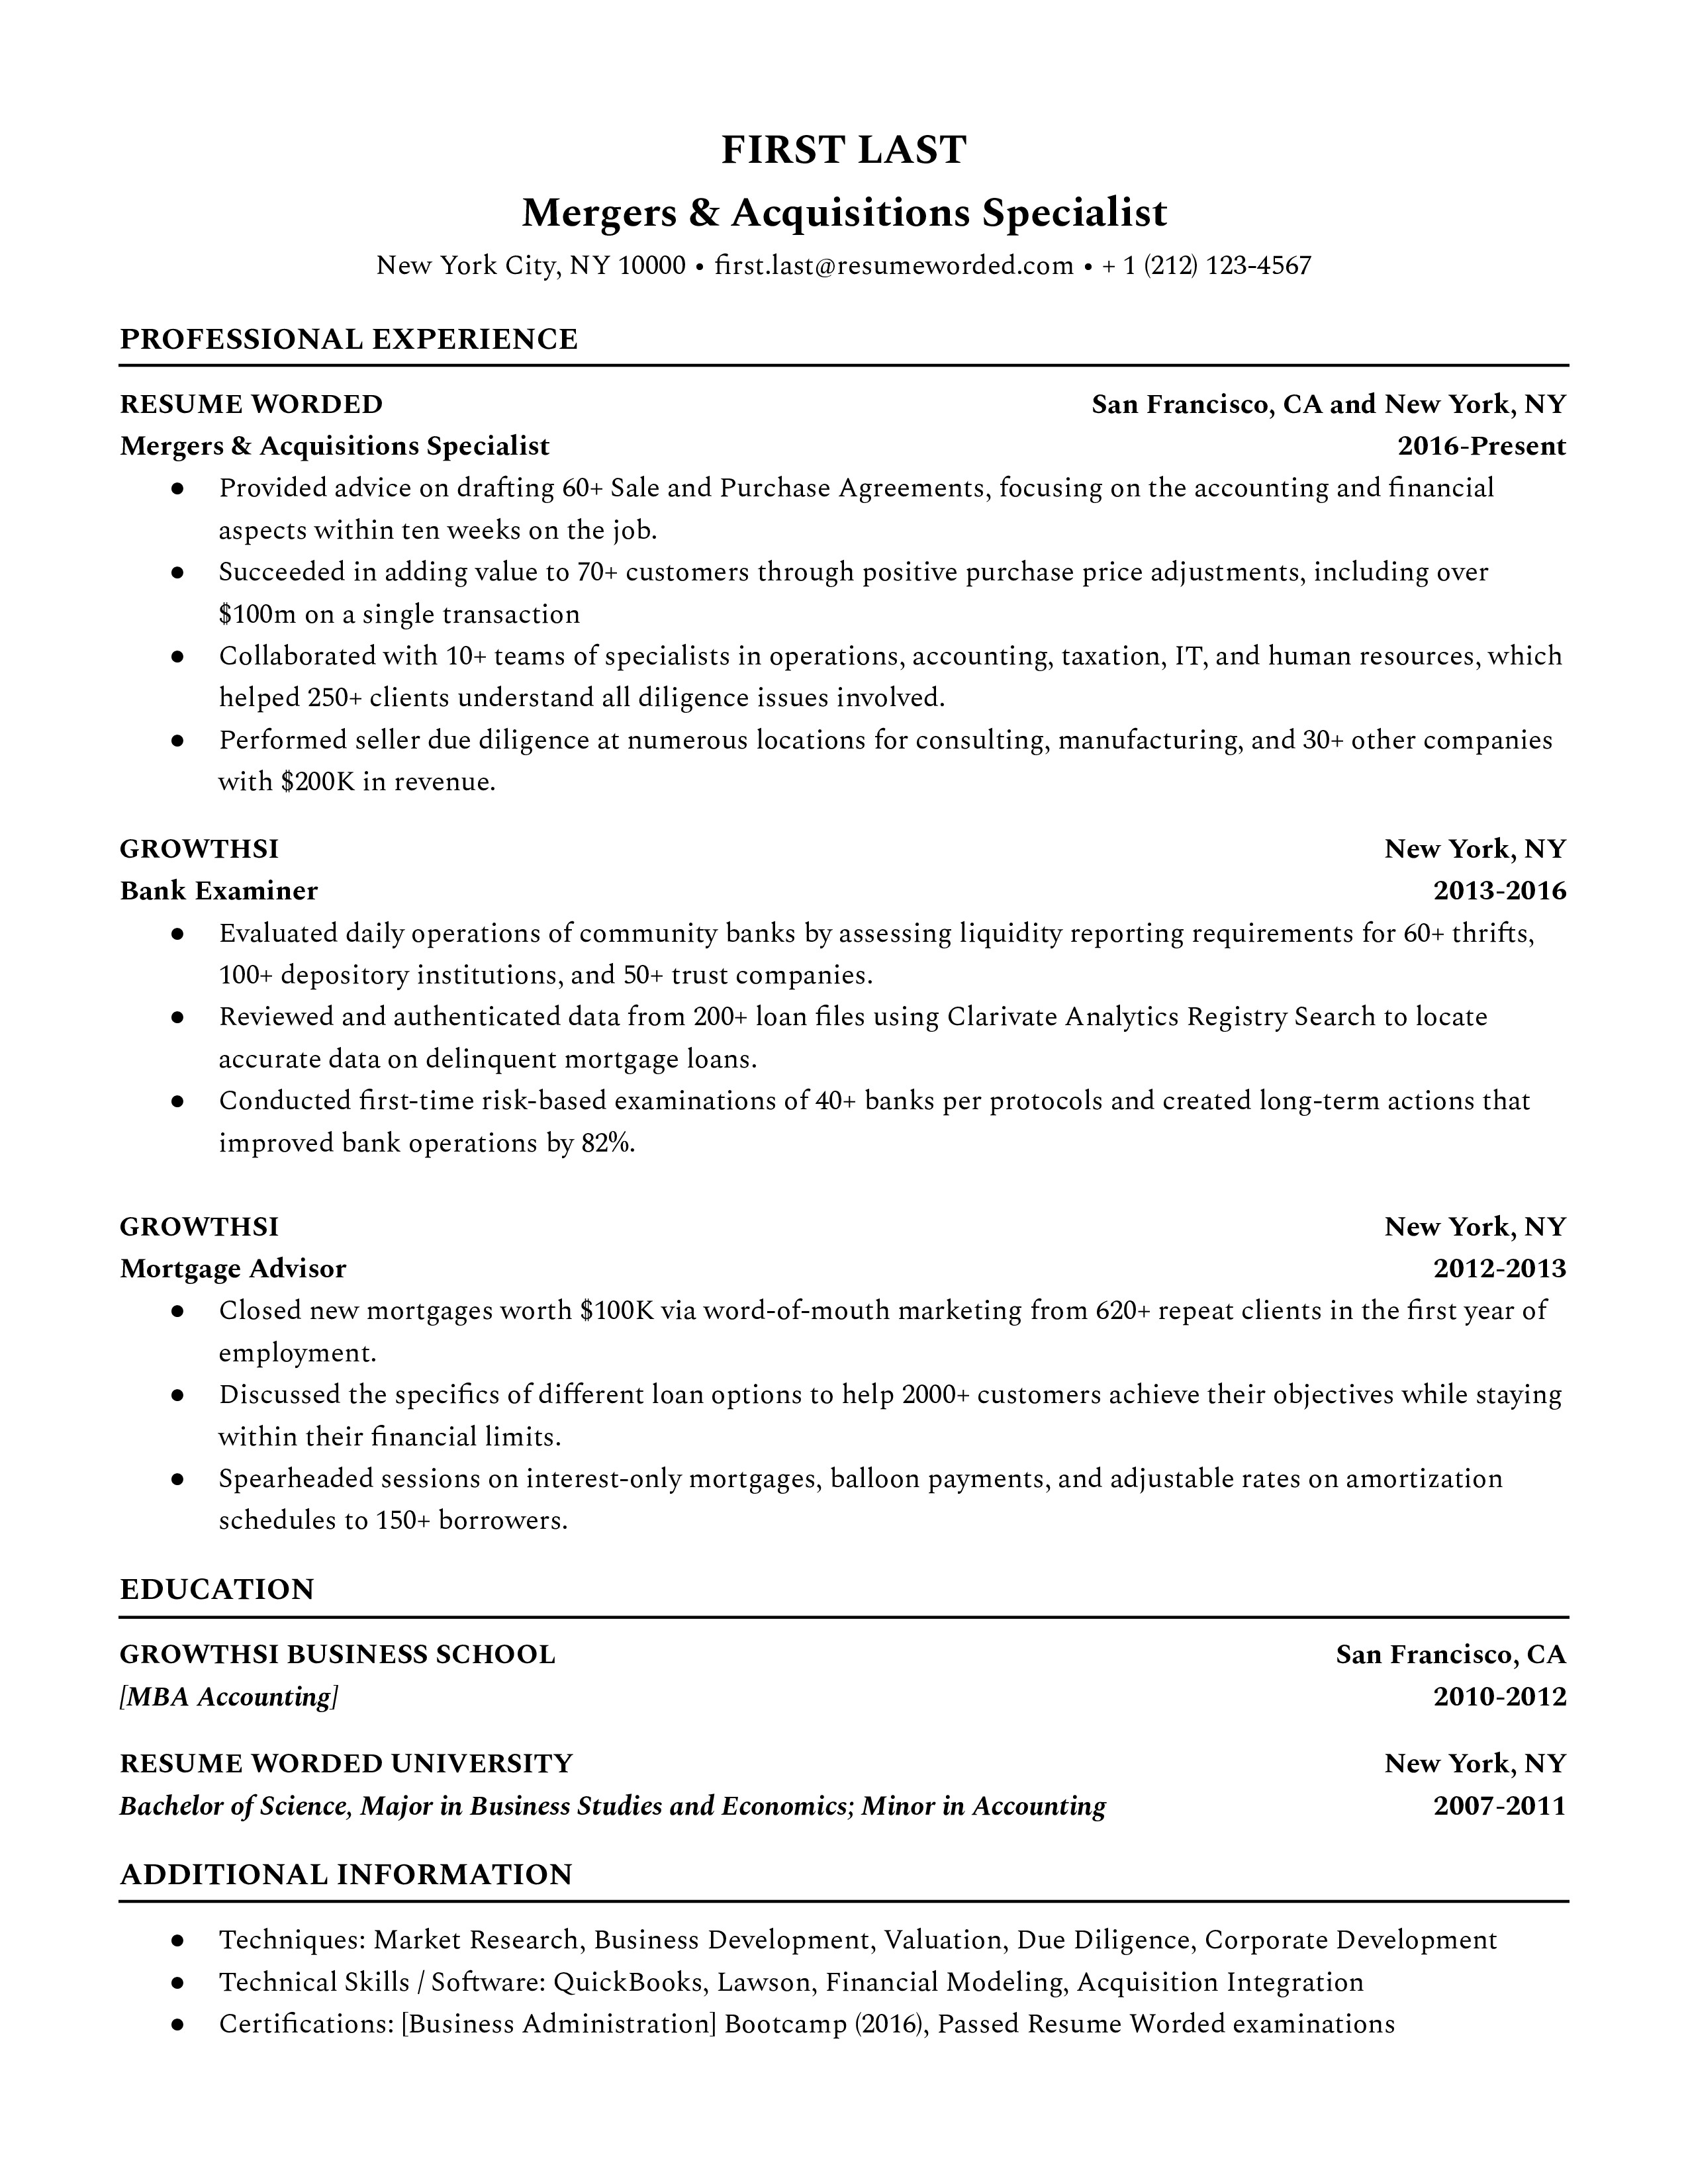 A mergers & acquisitions specialist resume template that uses metrics to accentuate achievements. 